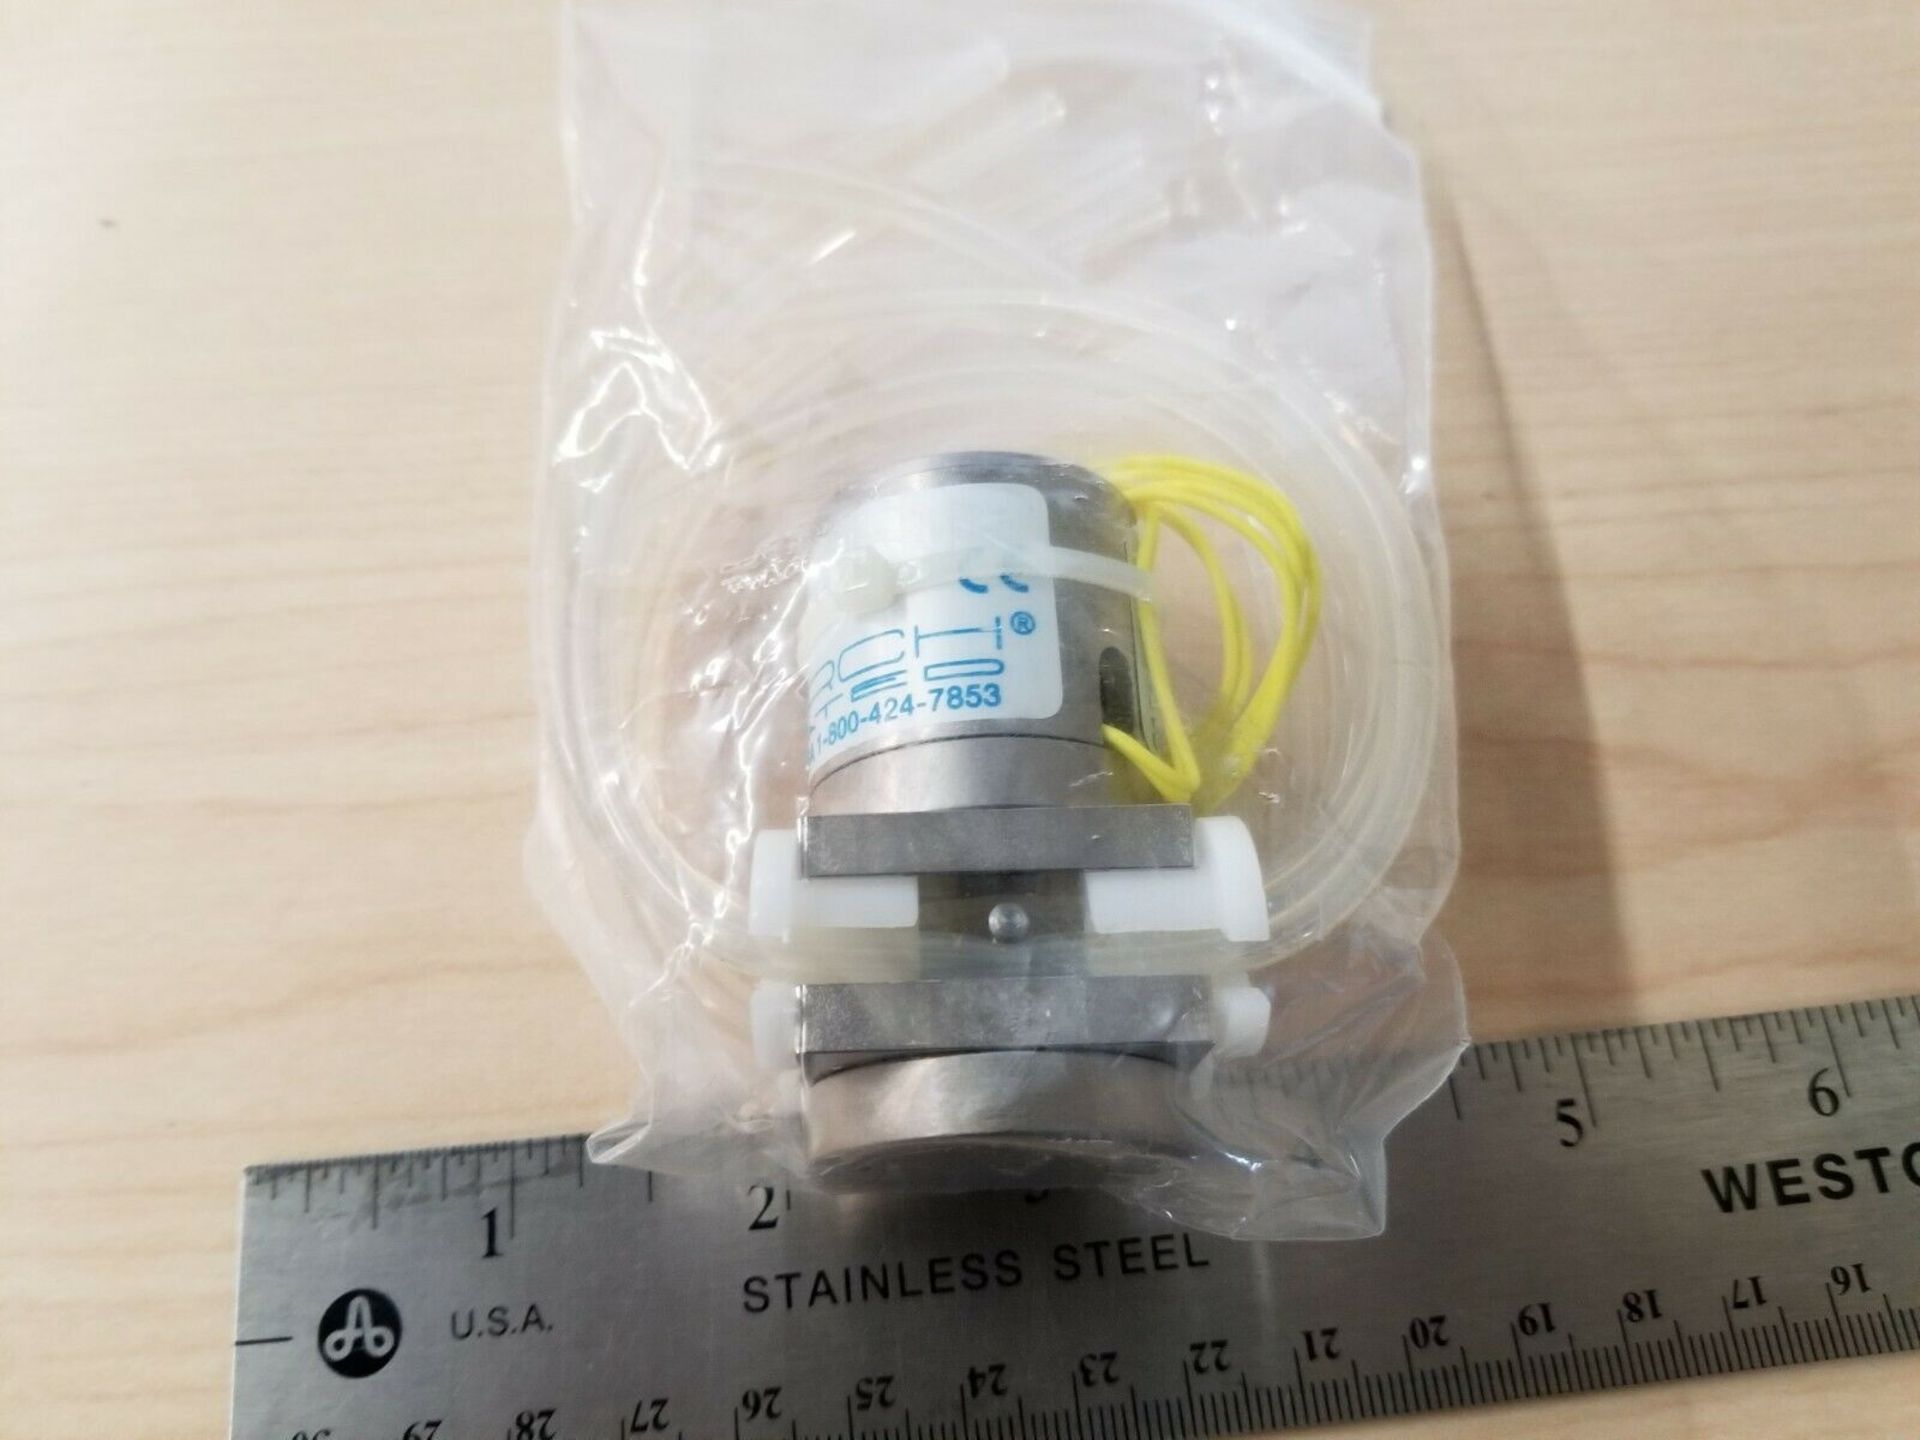 NEW NRESEARCH SOLENOID ISOLATION VALVE - Image 2 of 8